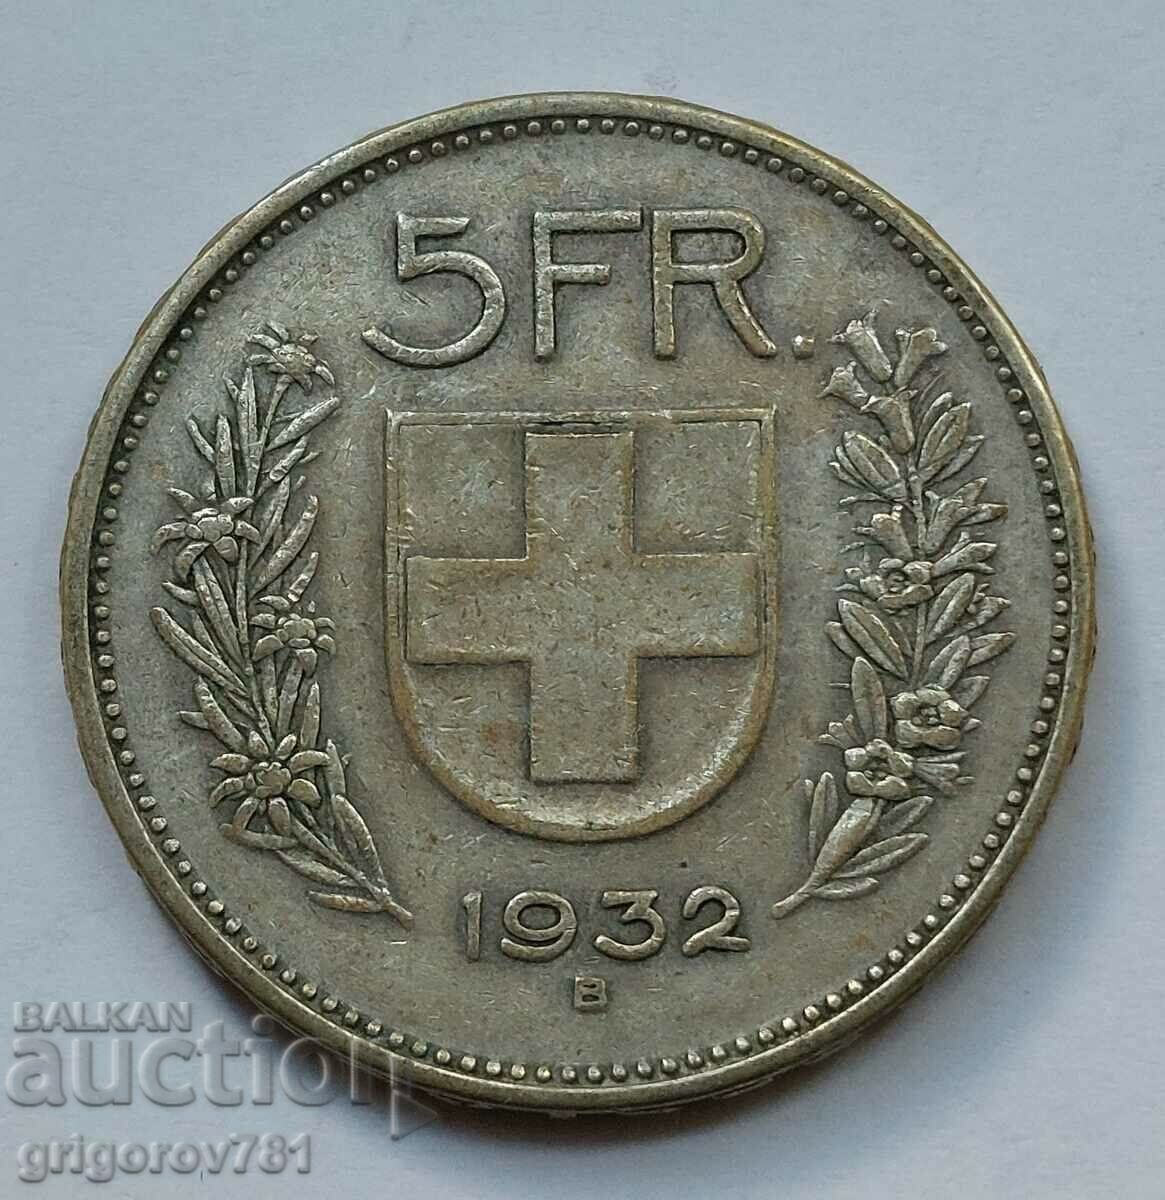 5 Francs Silver Switzerland 1932 B - Silver Coin #2